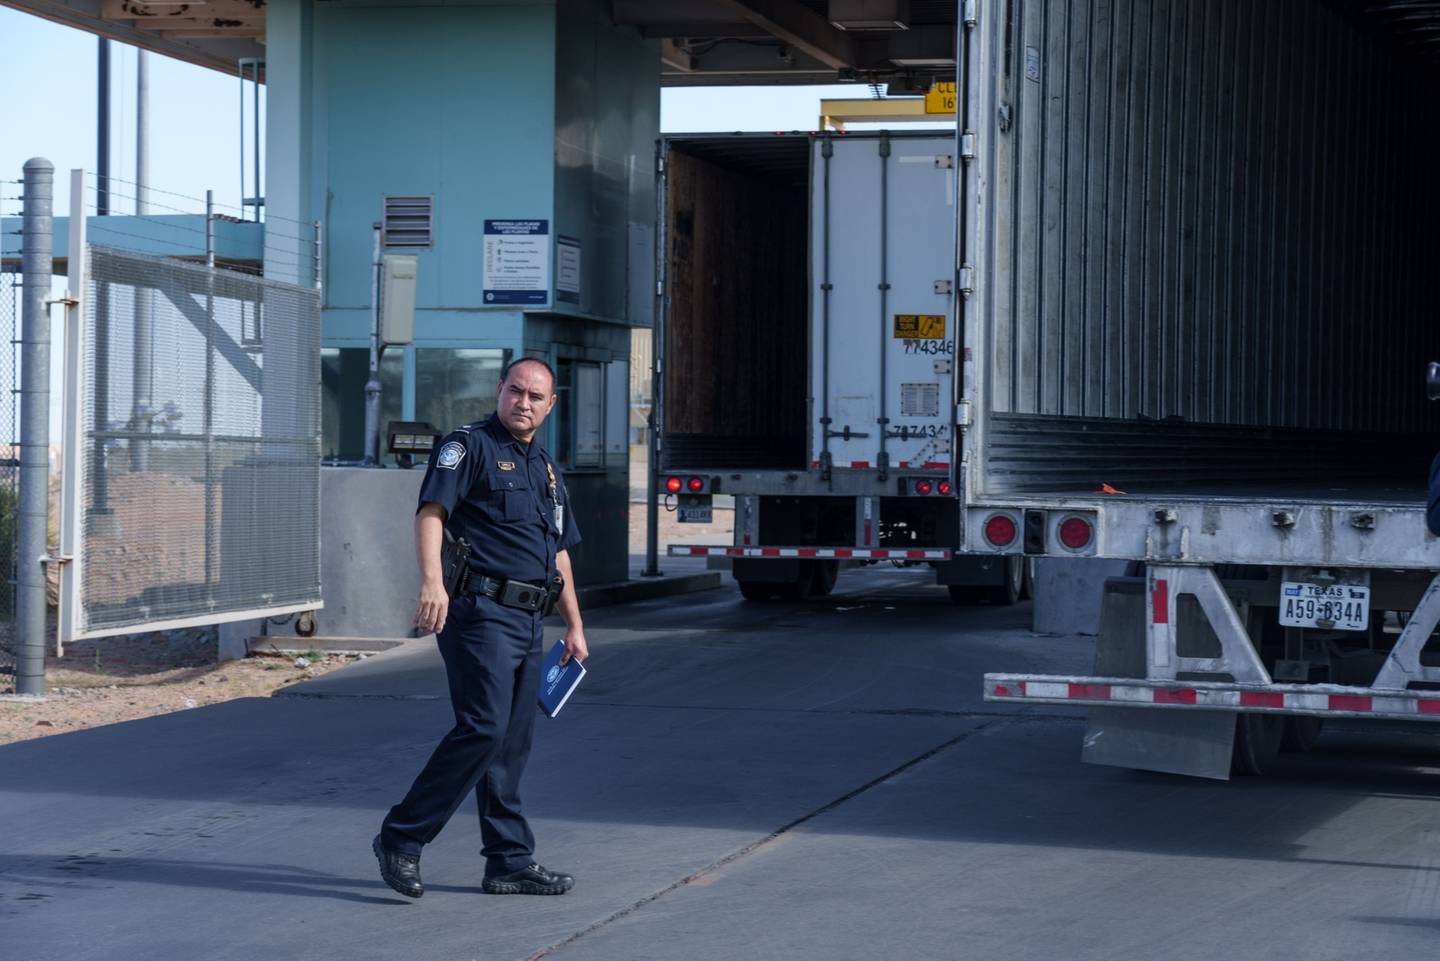 Juan Carrillo, assistant port director at the Santa Teresa Port of Entry, walks near an inspection area for commercial cargo in Santa Teresa, New Mexico on Wednesday, August 10, 2022.dfd